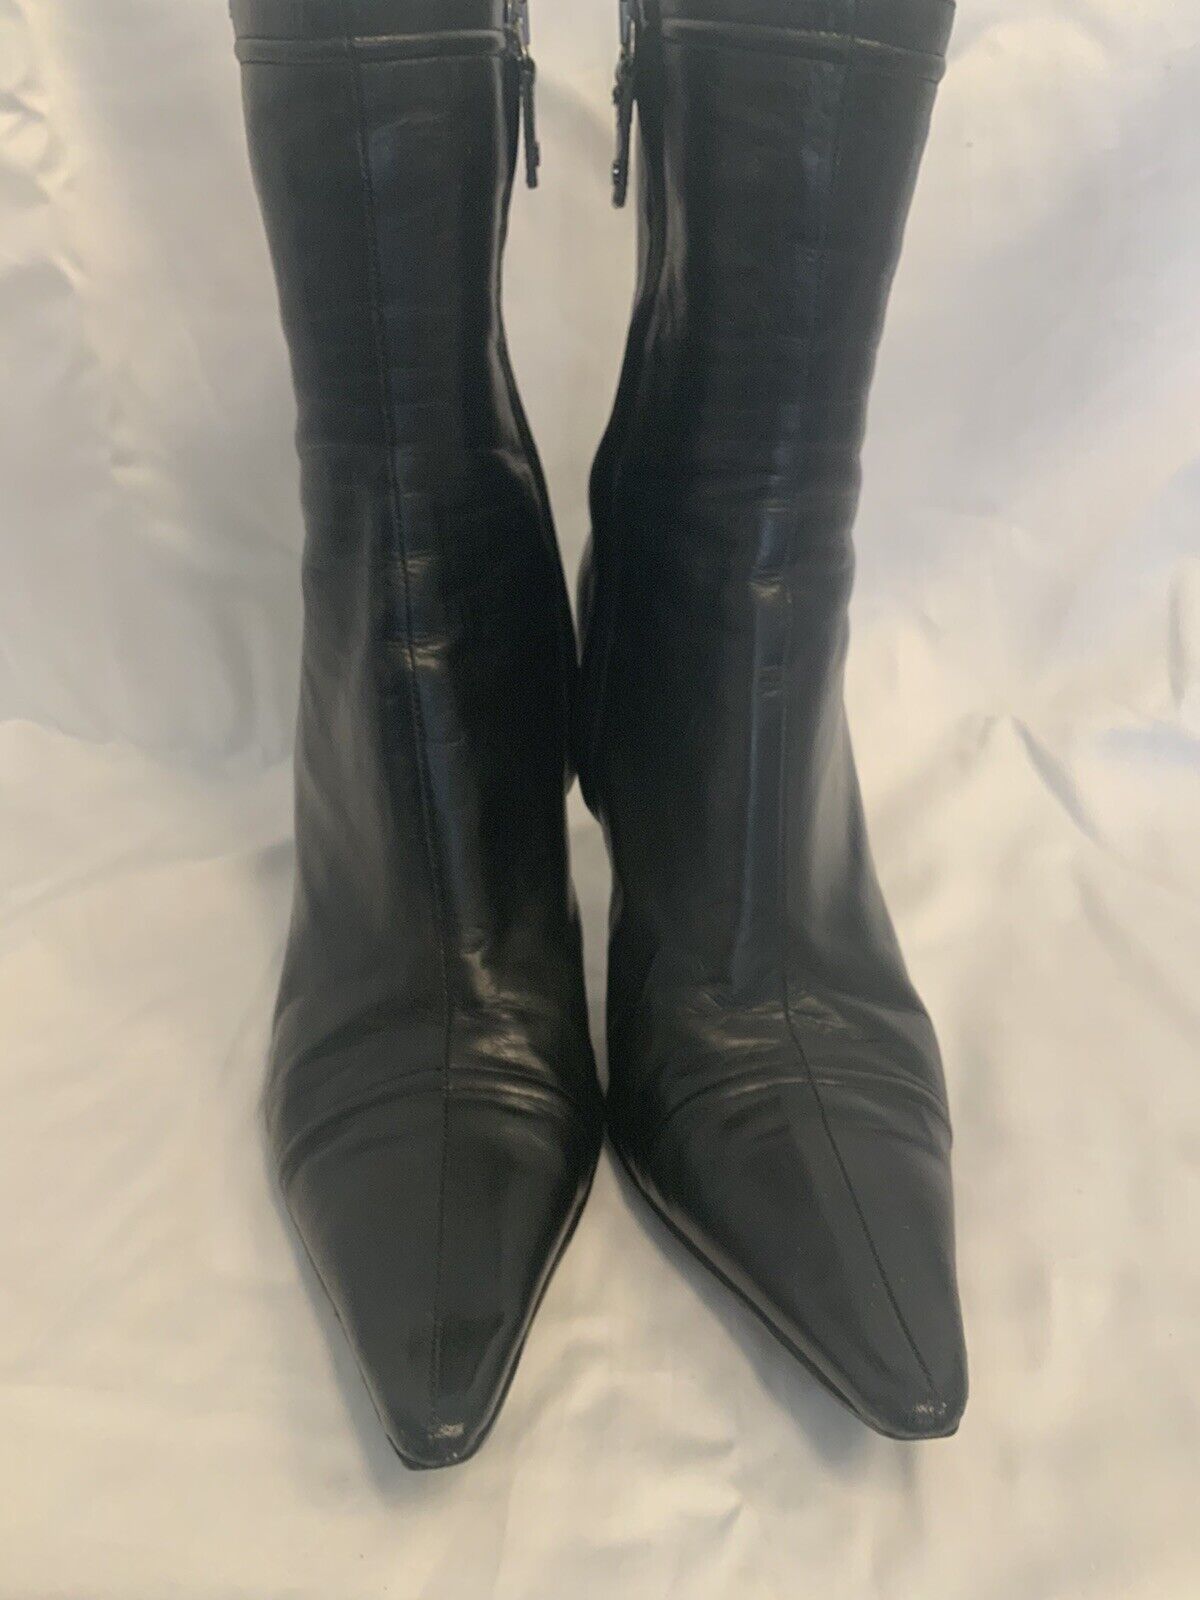 Authentic Chanel Leather Boots Black 39.5 - image 5